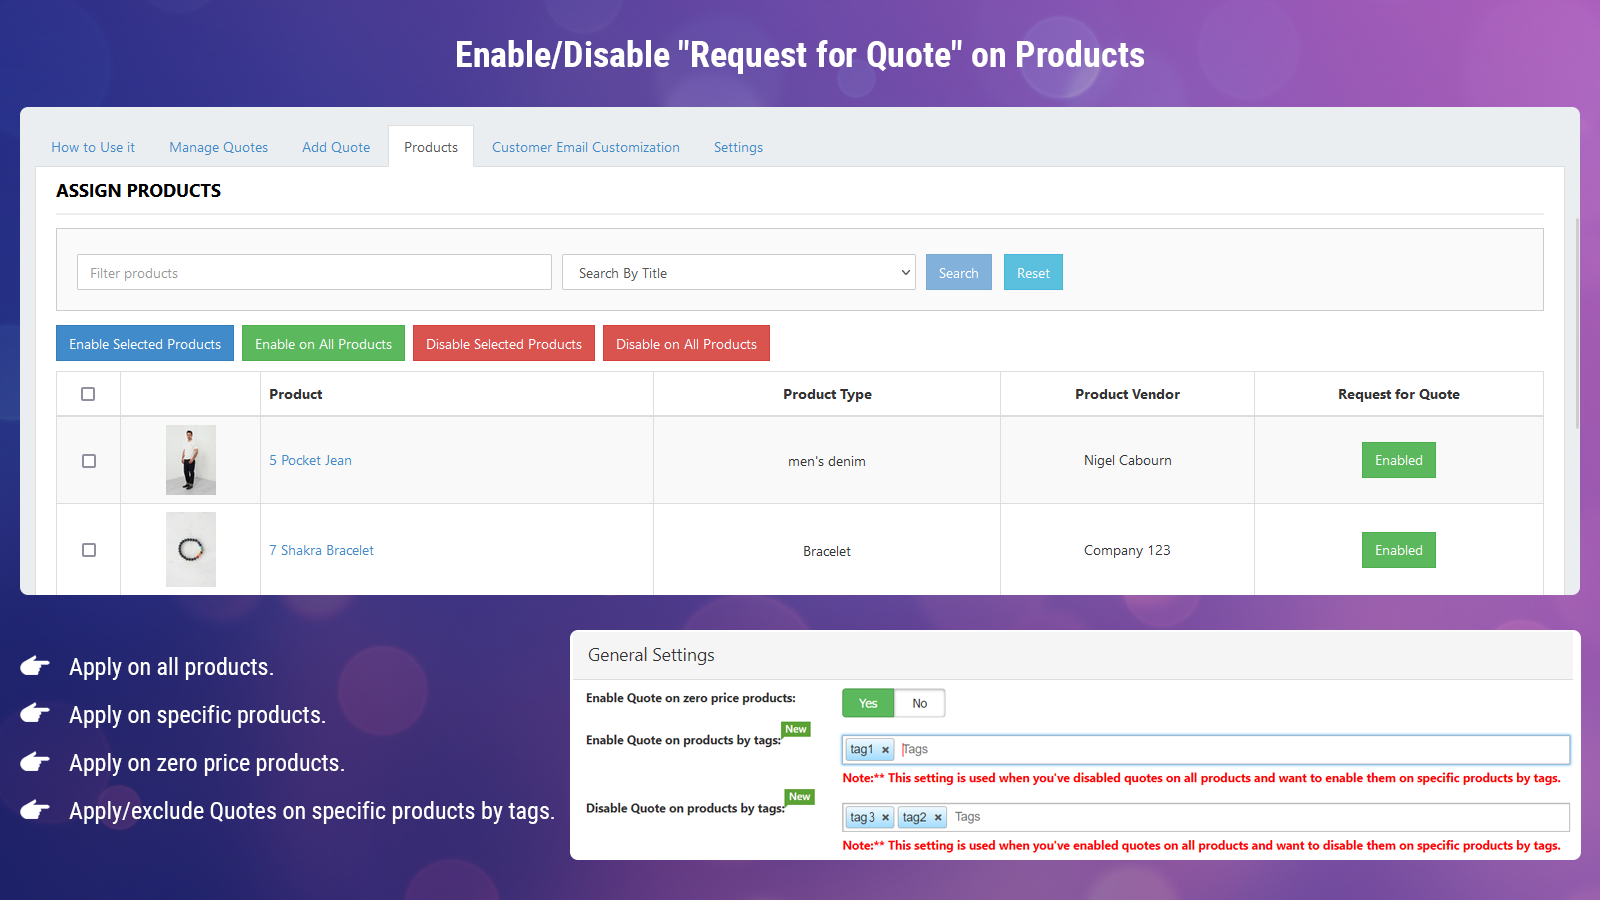 Enable/Disable Products for Quotation - Hide Price